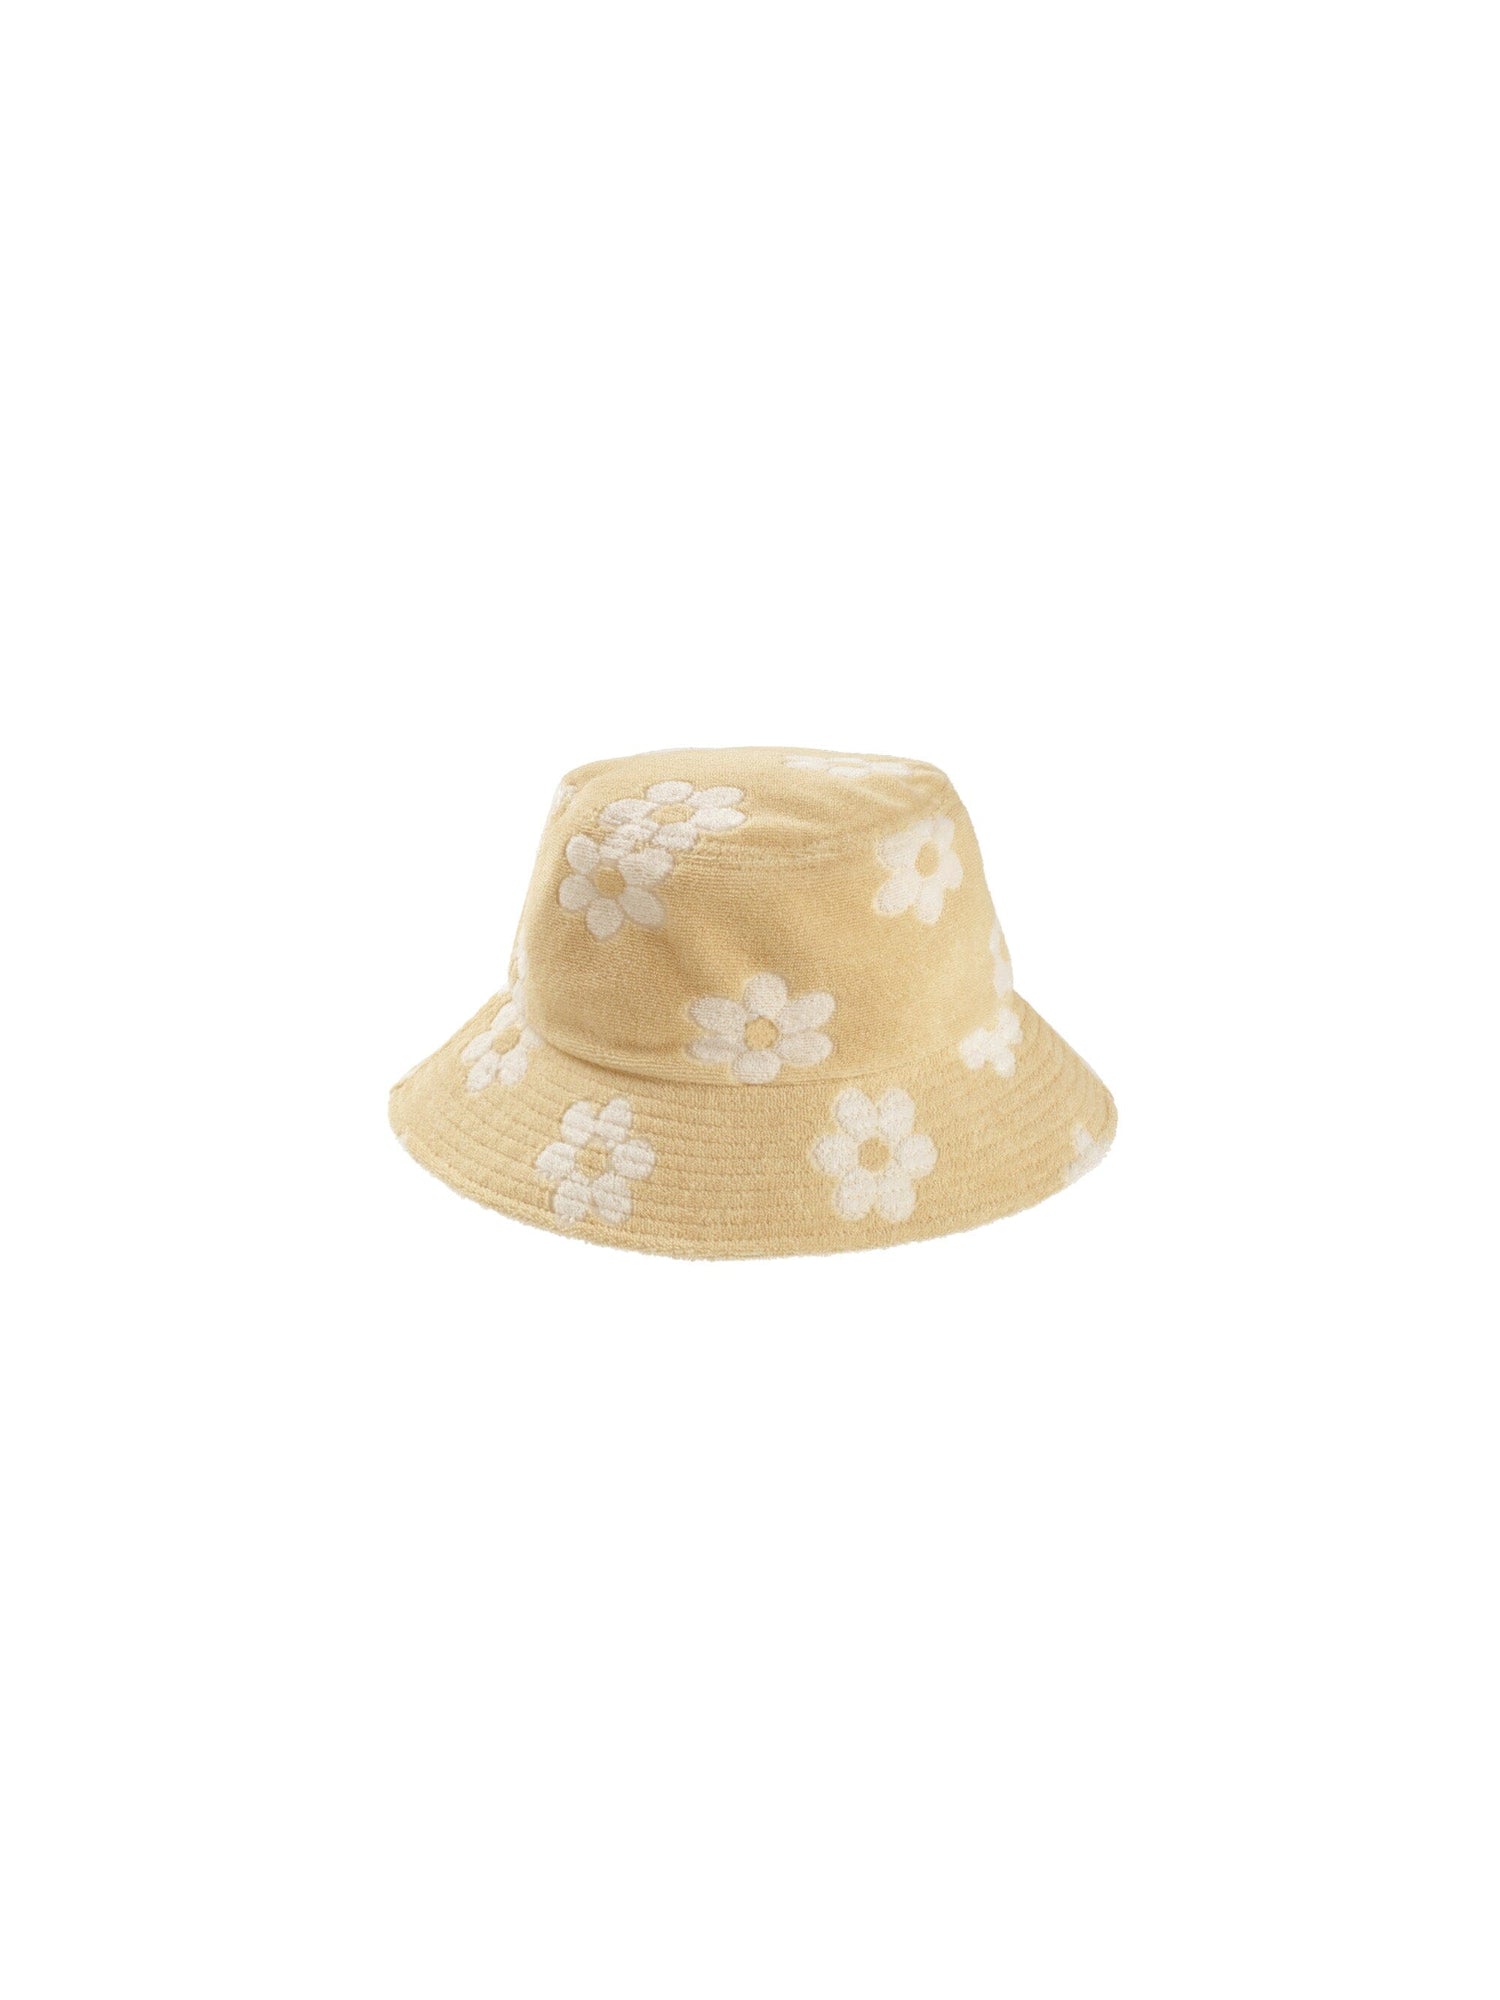 Daisy Terry Bucket Hat 110 ACCESSORIES CHILD Rylee and Cru S/M 